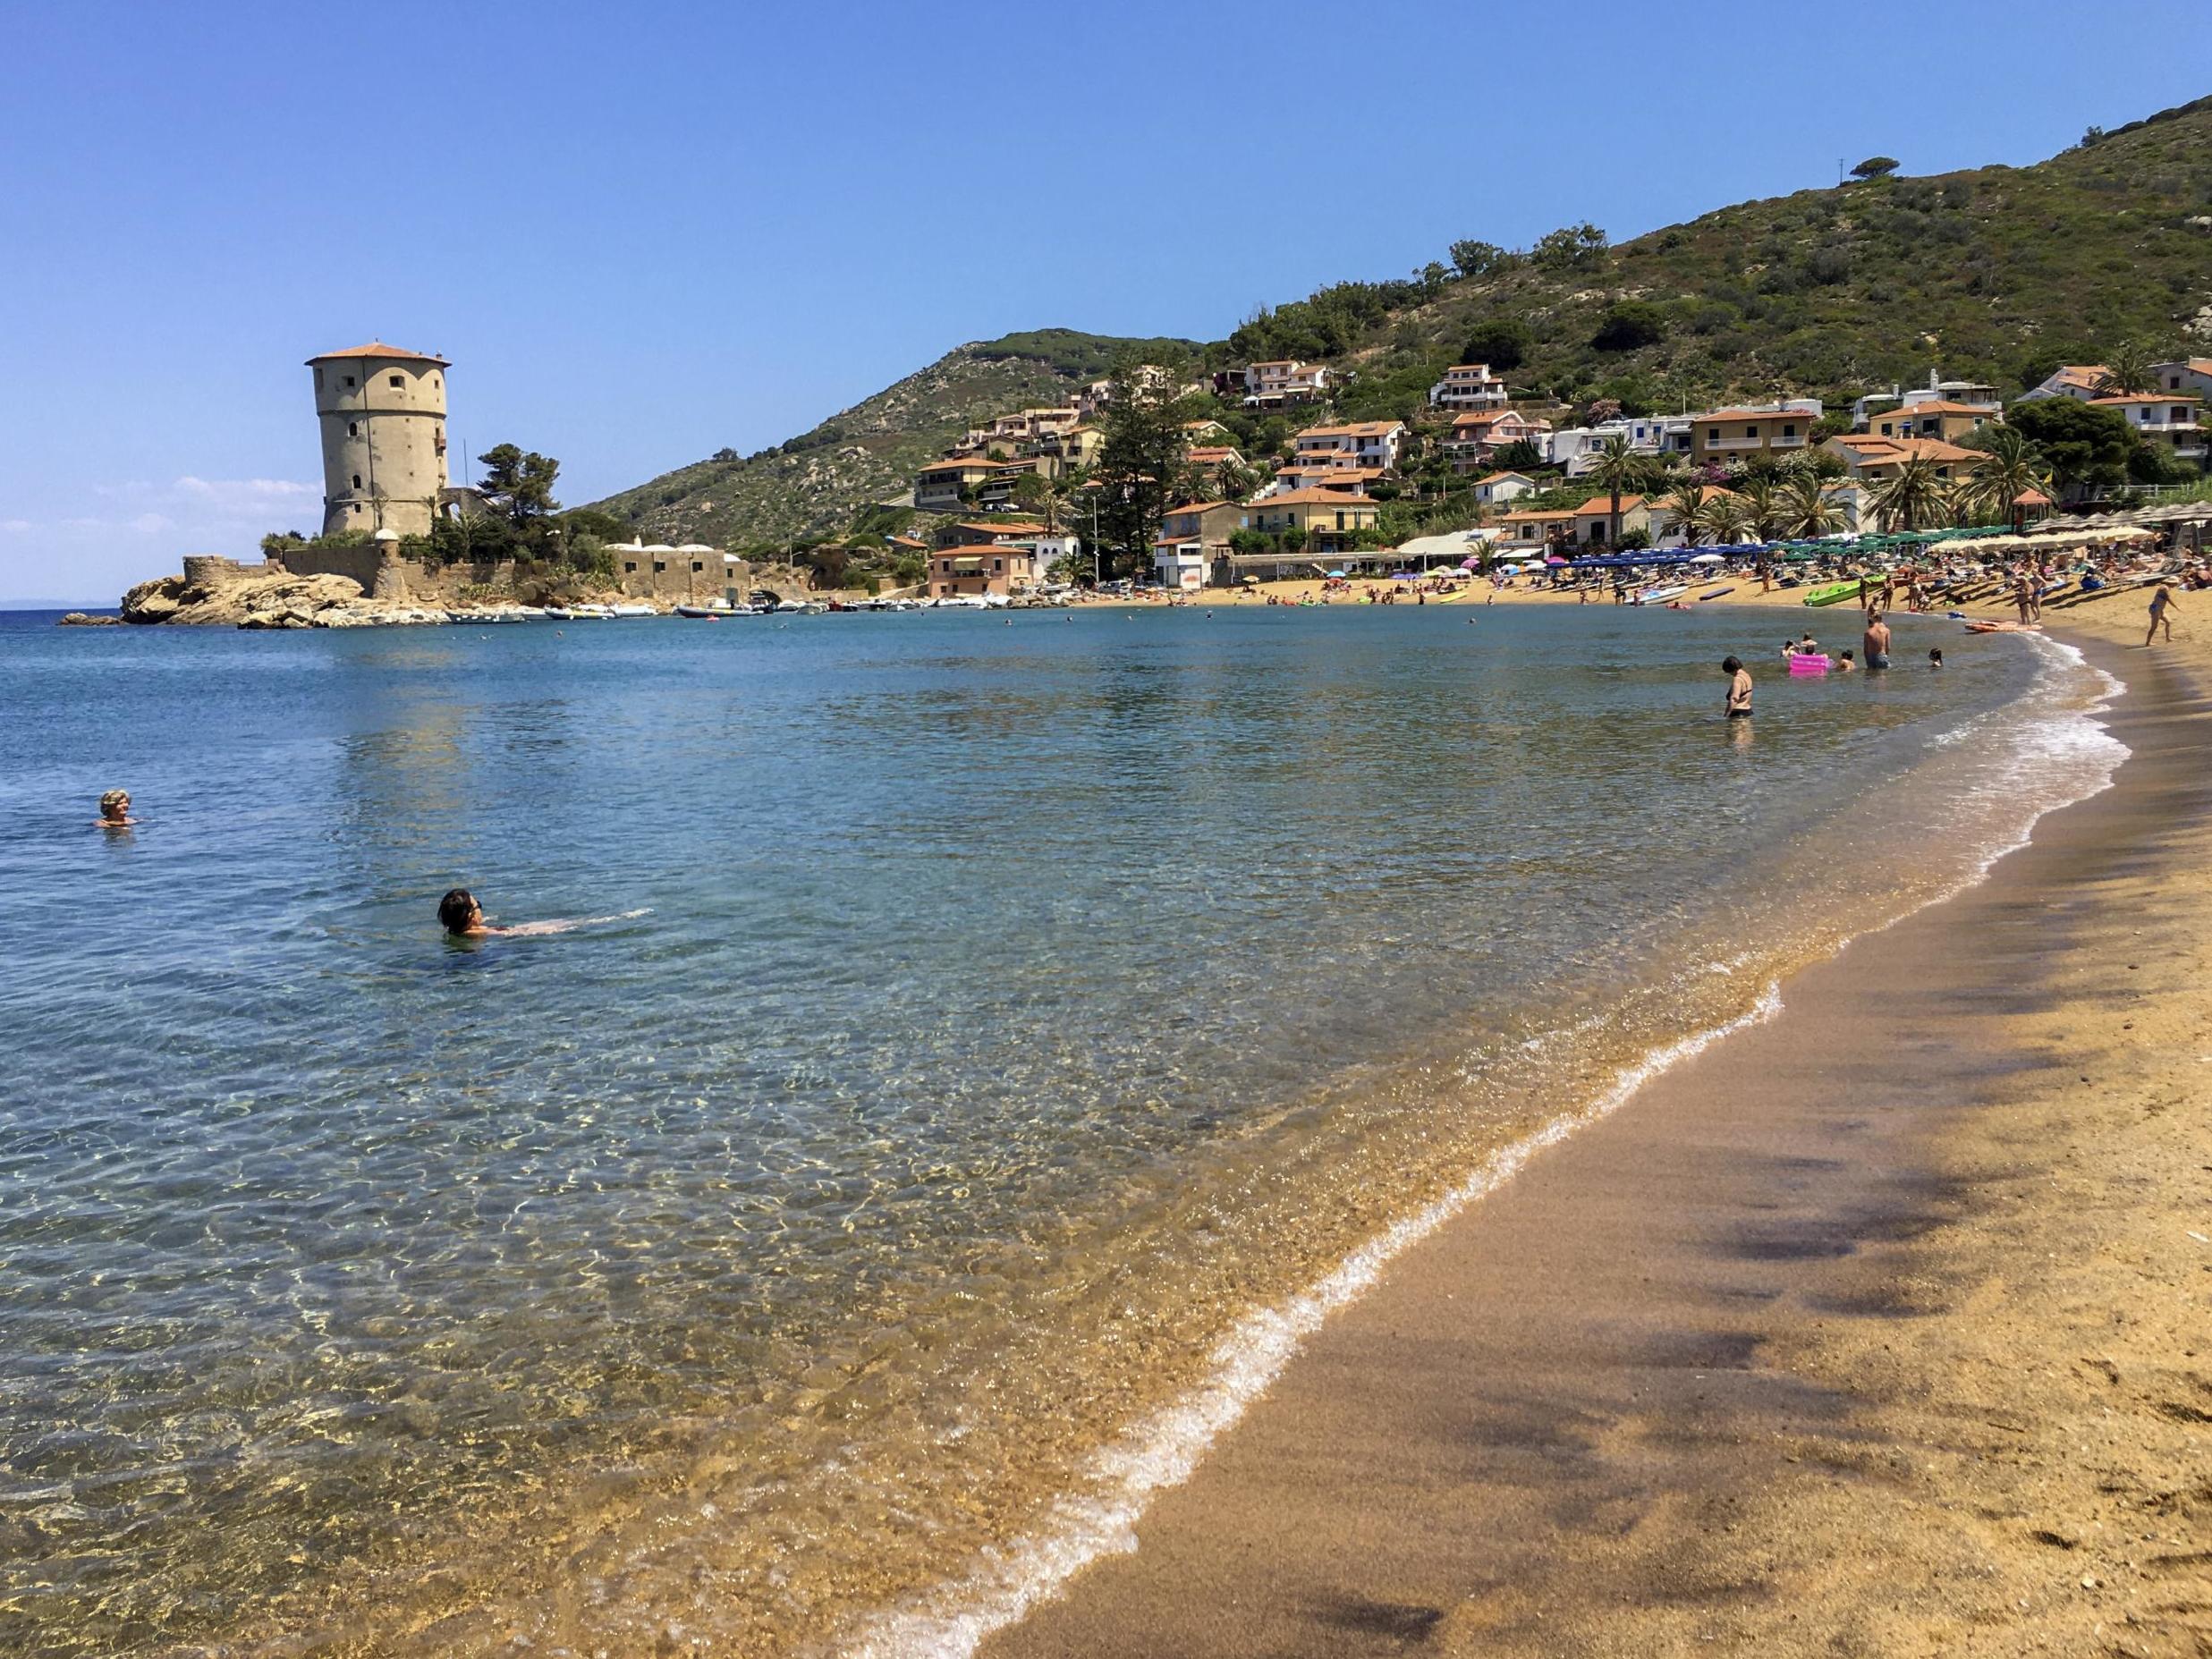 People enjoy the sun and the fresh water on a beach at the Giglio island, in front of Tuscany, Italy